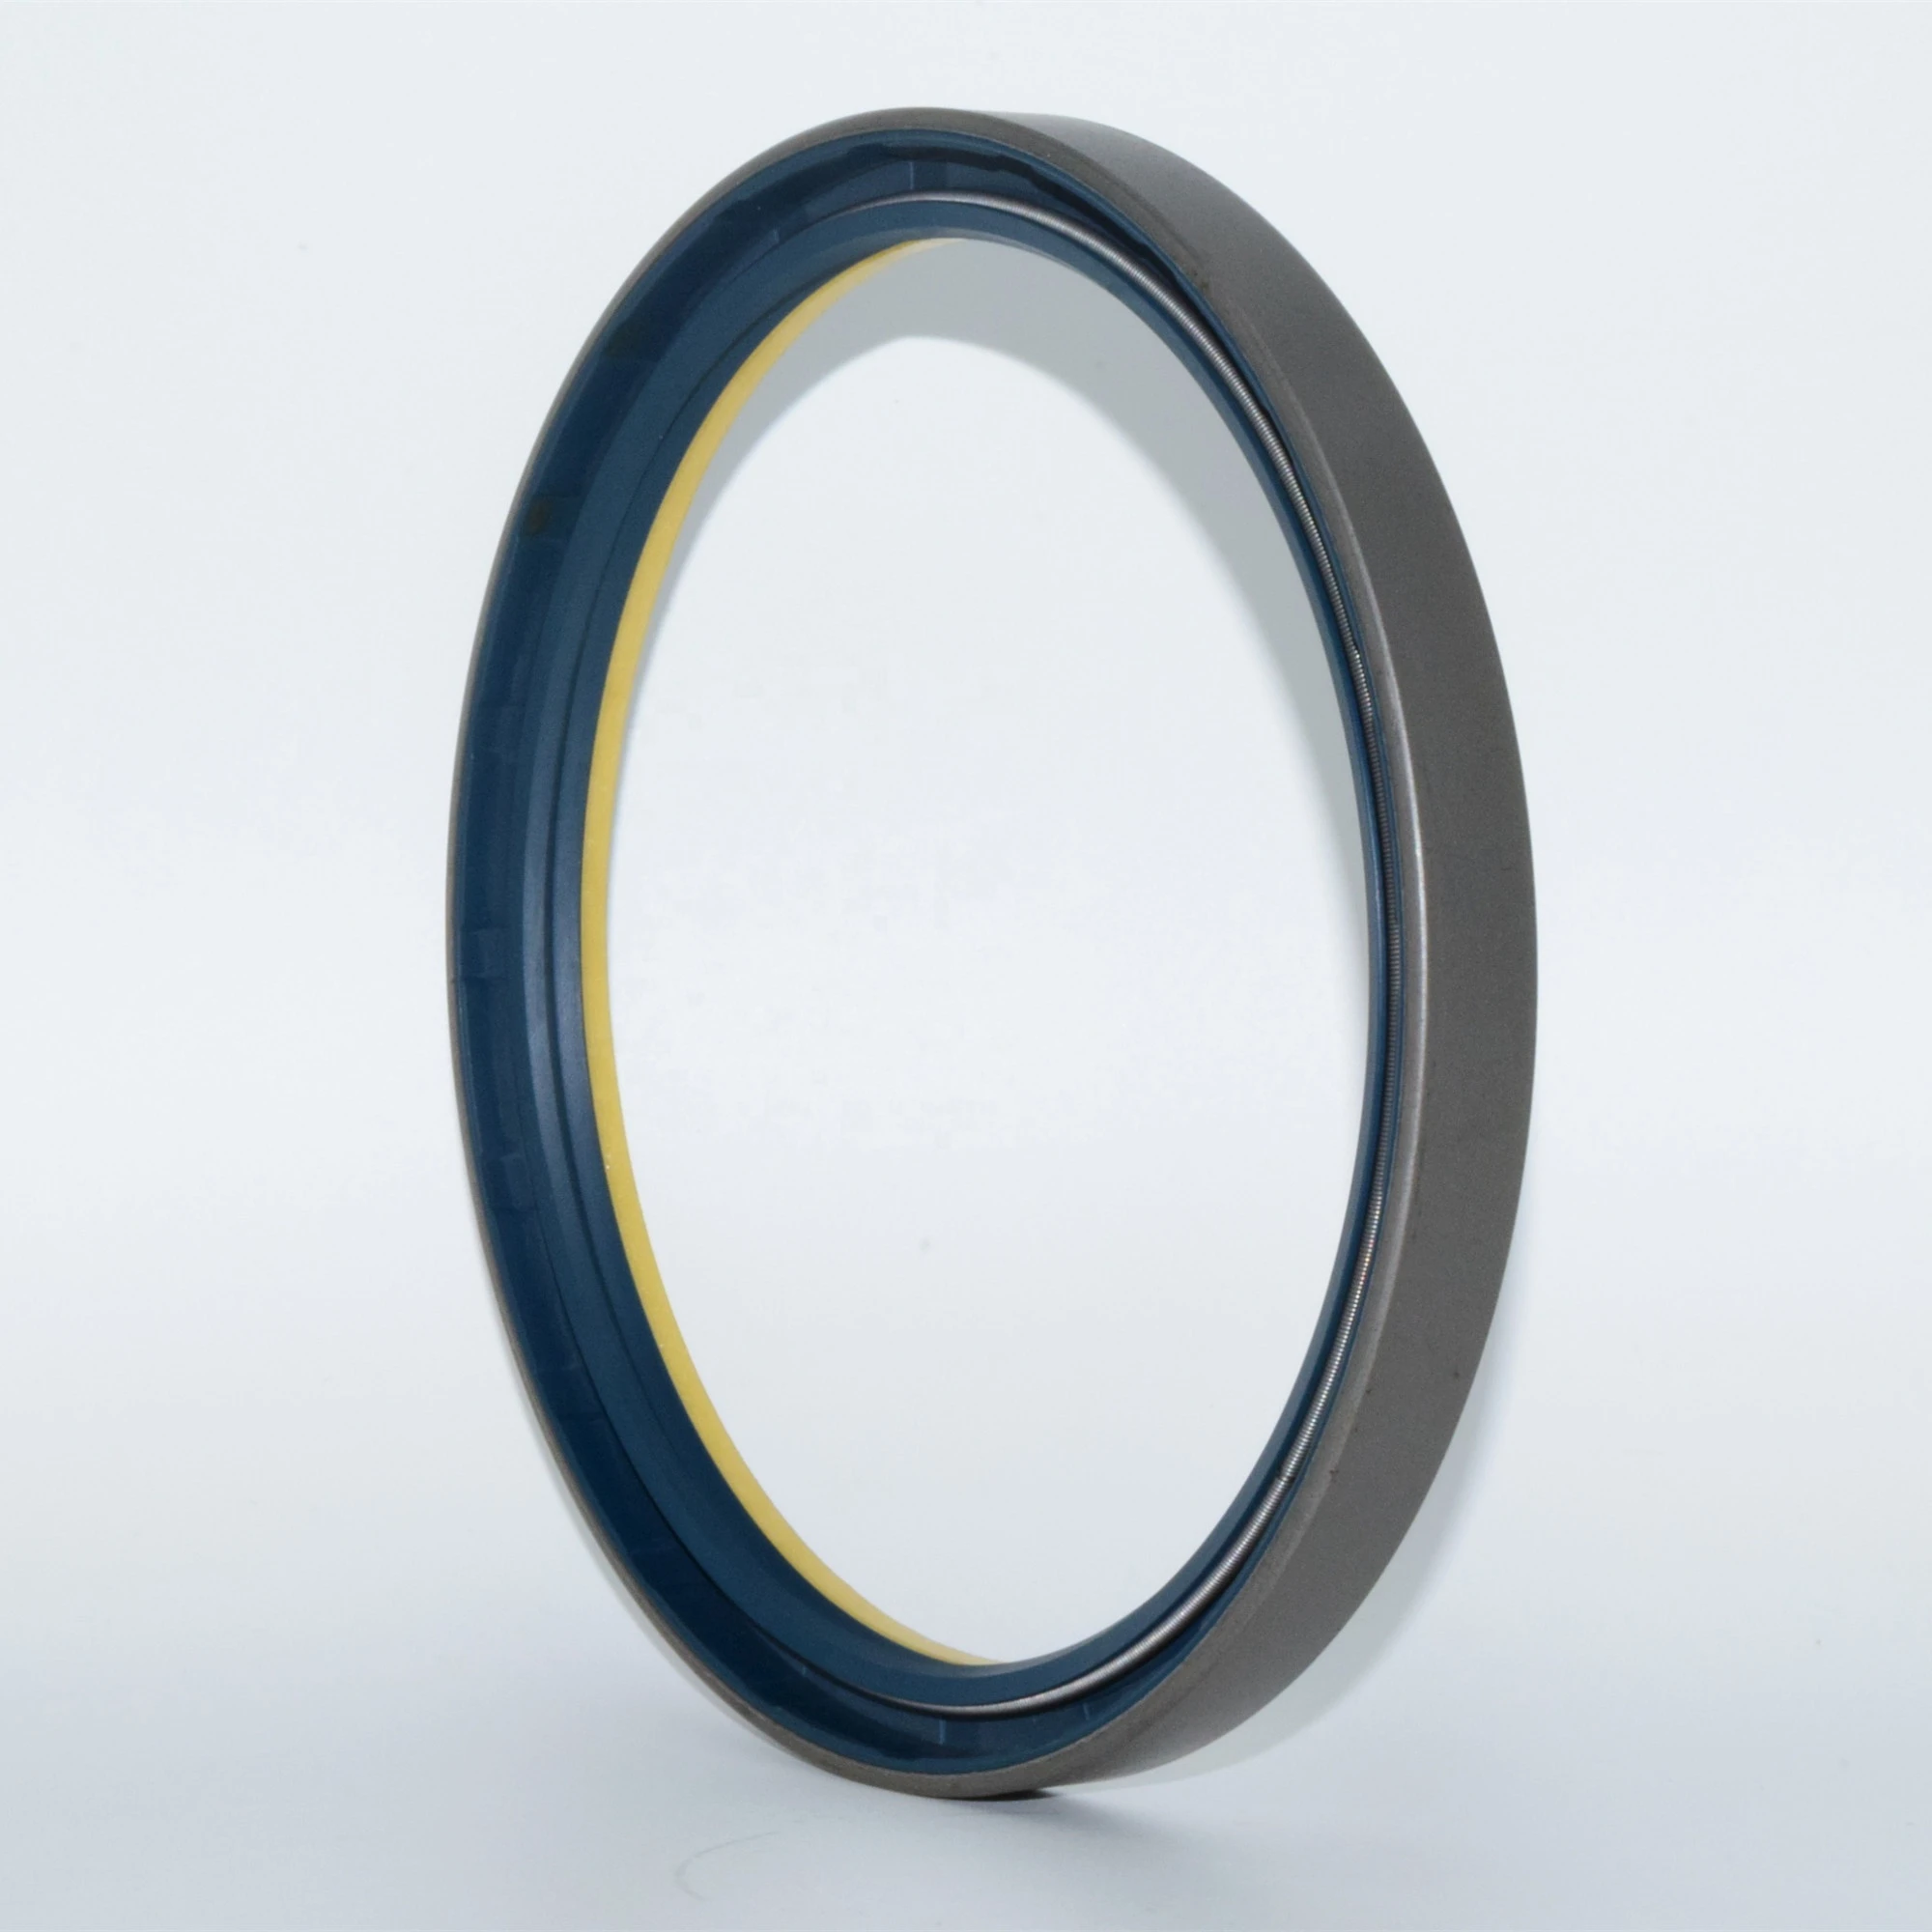 seal 170*195*18 mm 170x195x18 mm seal oil seals factory with nbr material combi type 12014157B tractor or agricultural machinery